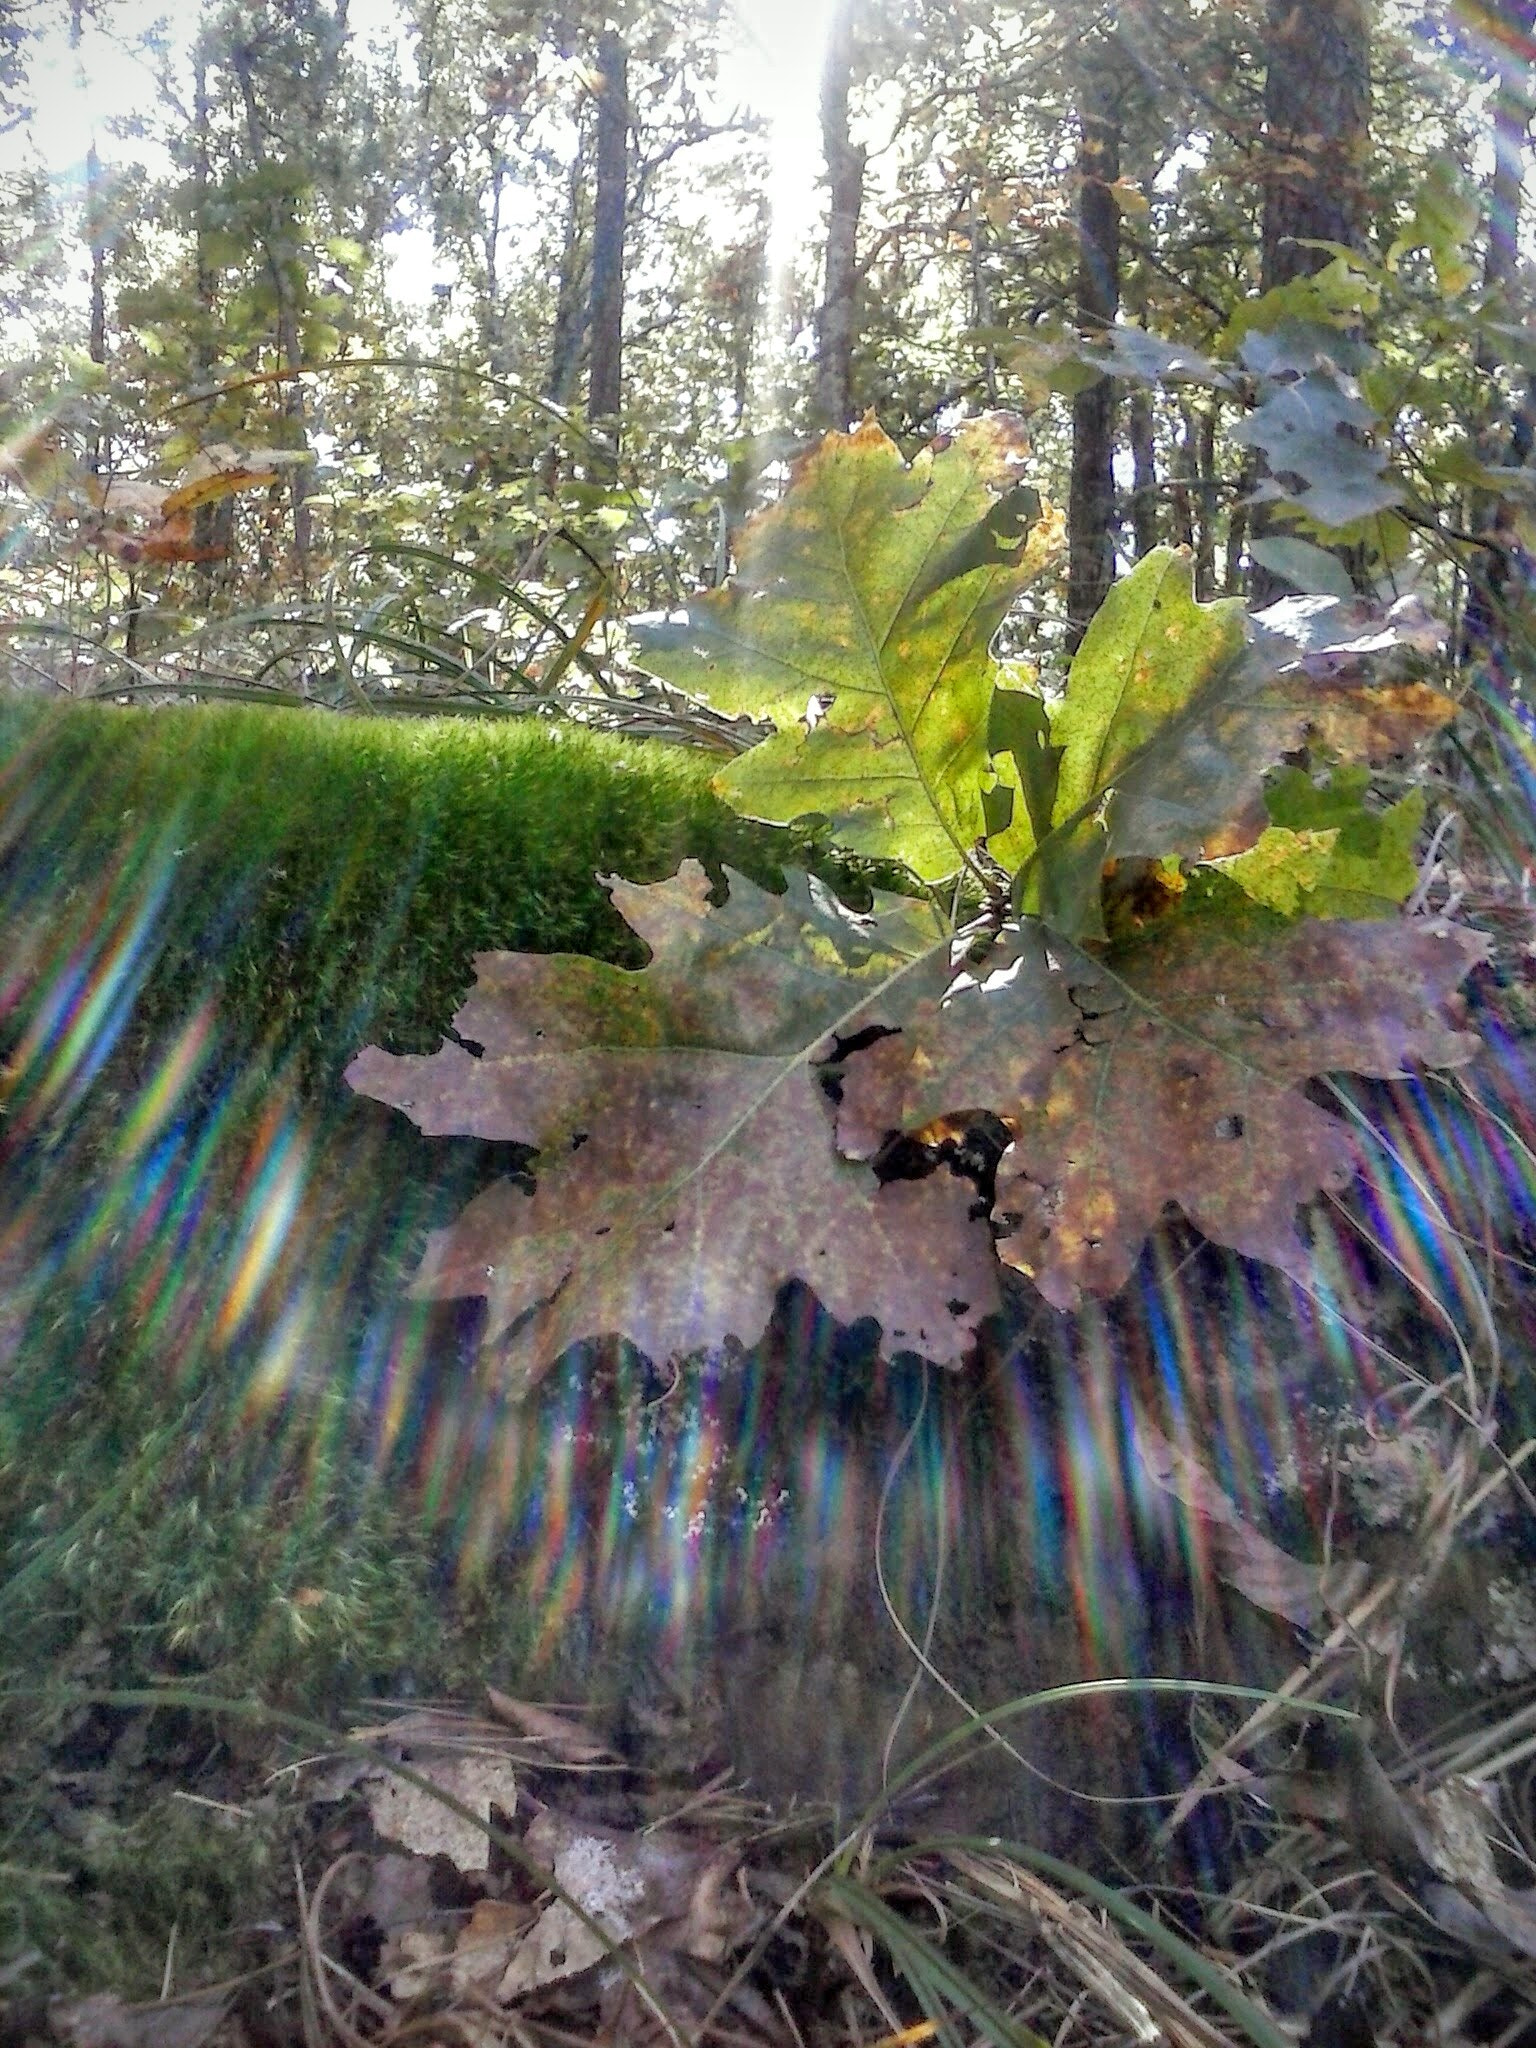 LG OPTIMUS L3 II sample photo. October in the ouachita mountains ii photography